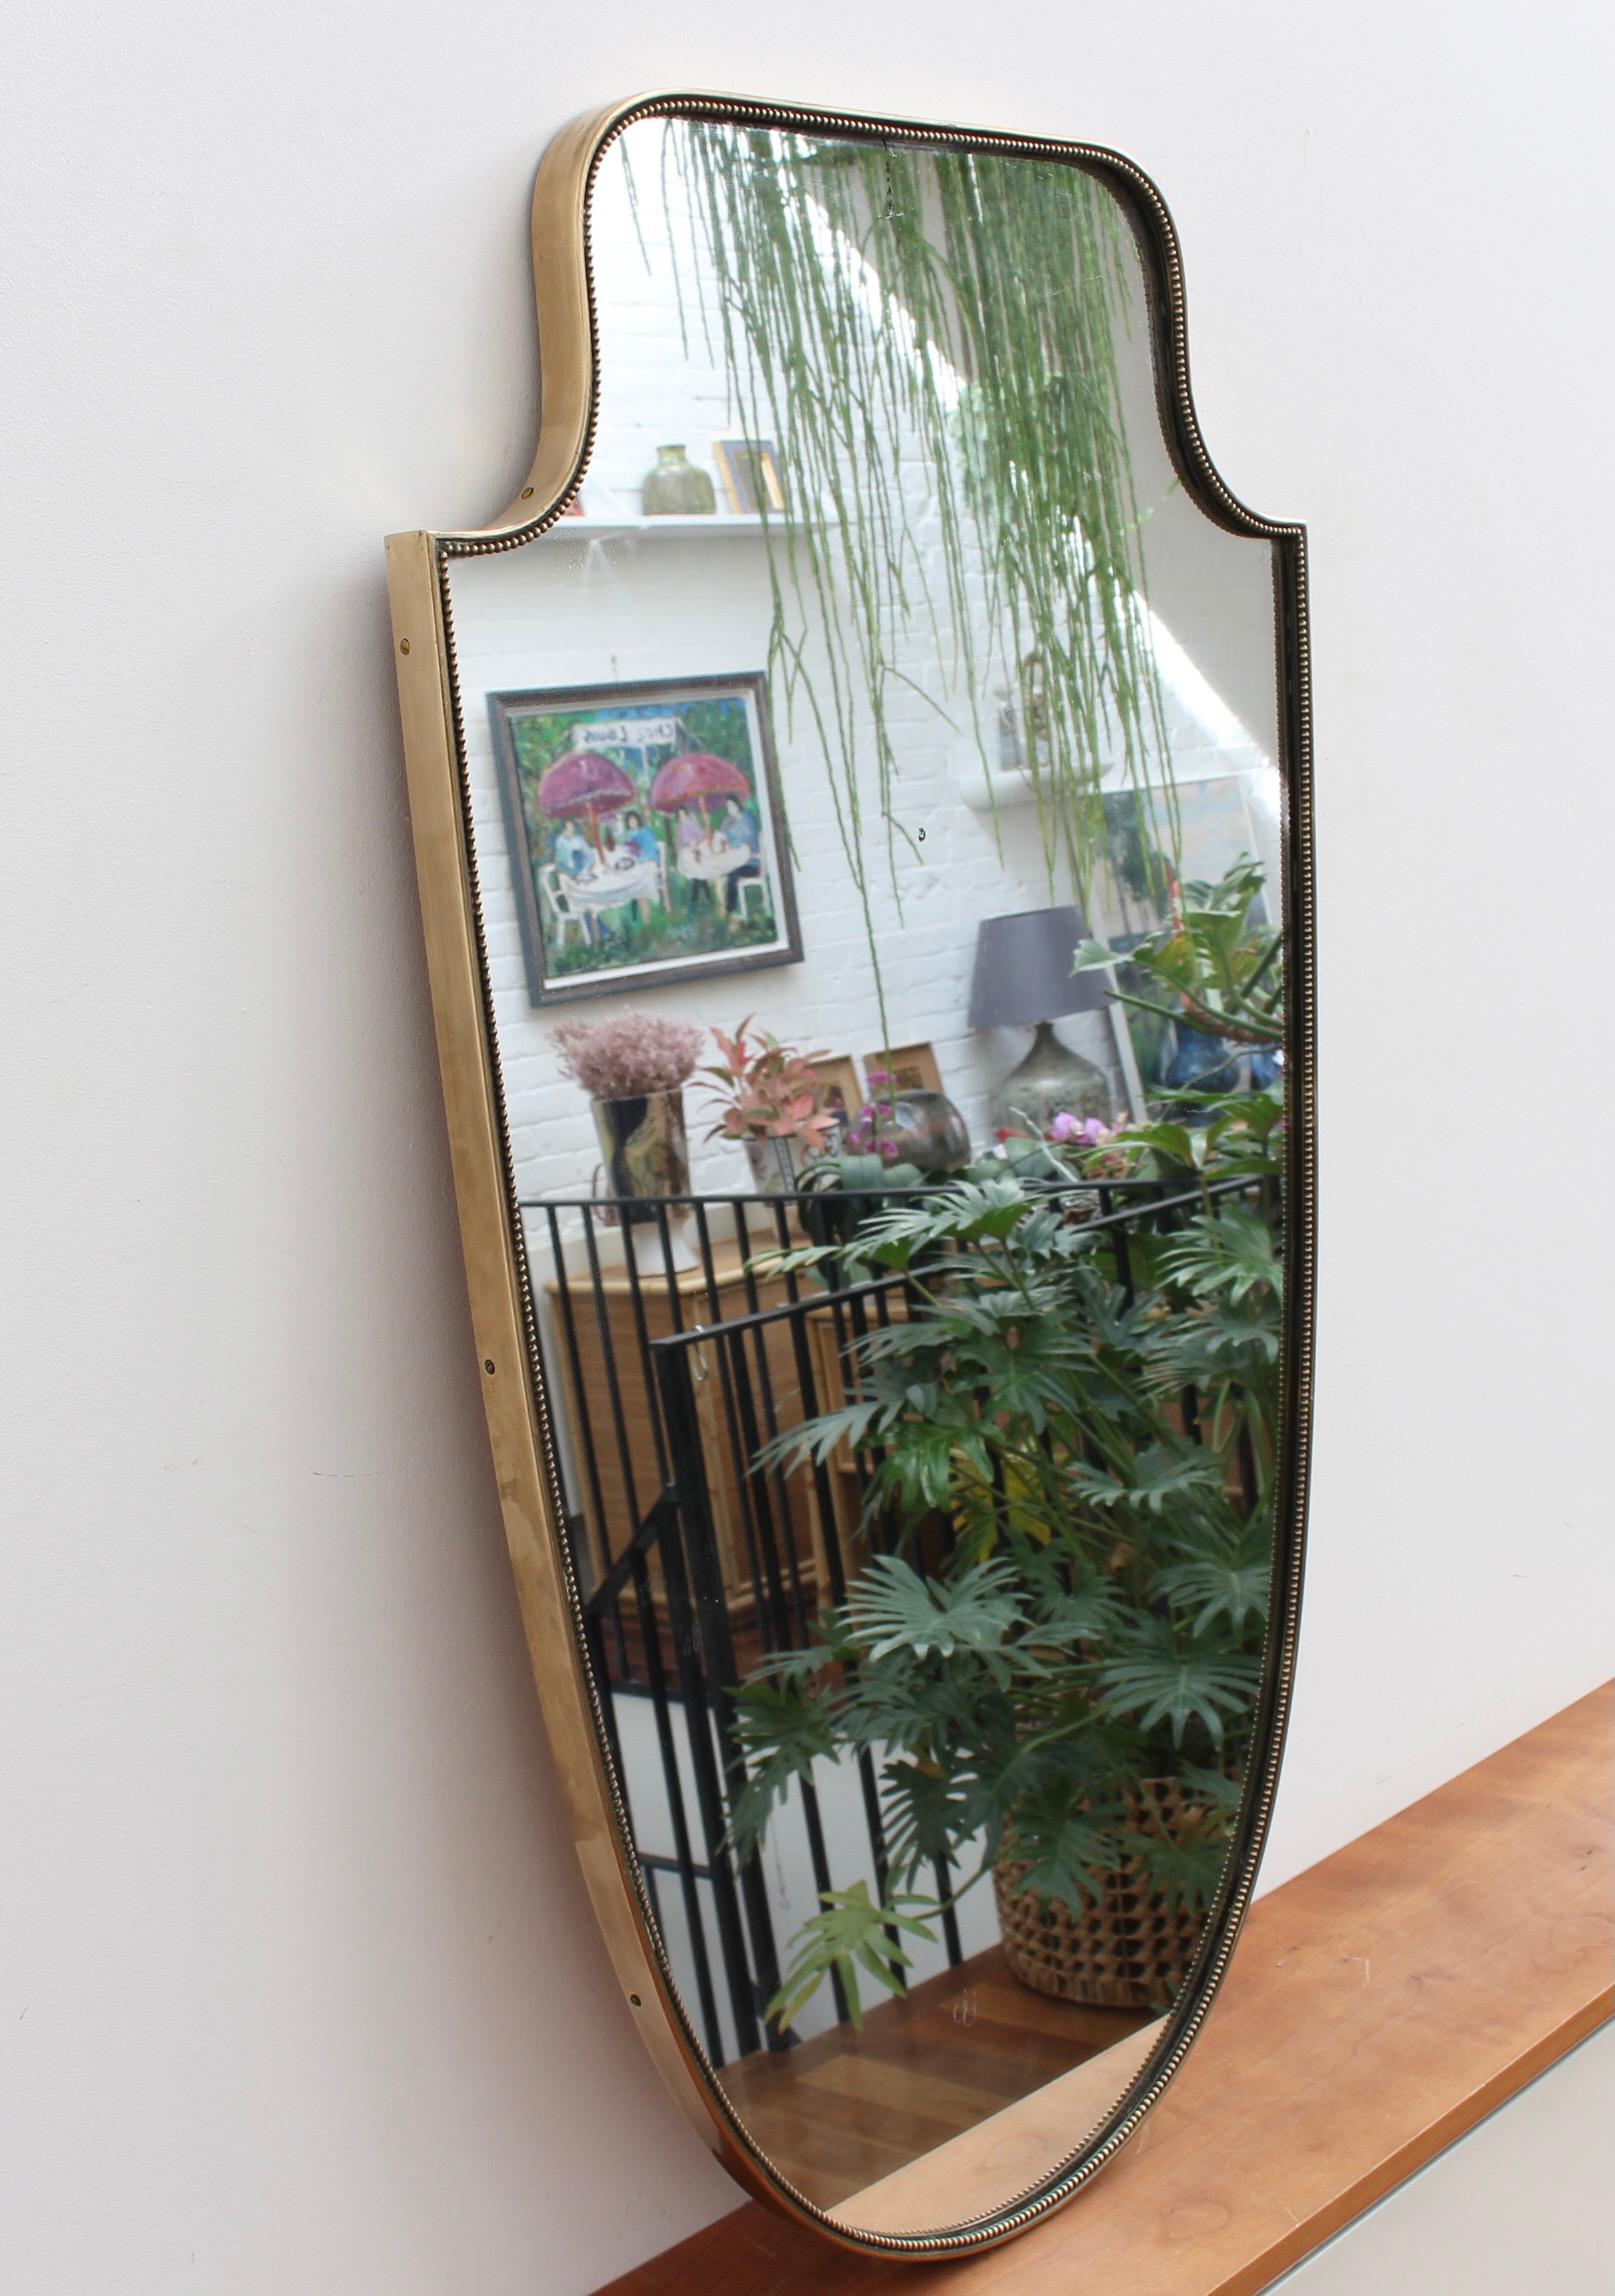 Mid-Century Italian wall mirror with brass frame and beading (circa 1950s). This mirror is simply elegant and characterful in a modern, Gio Ponti style. It is large, classically crest-shaped with a delightful beading adding visual interest. It is